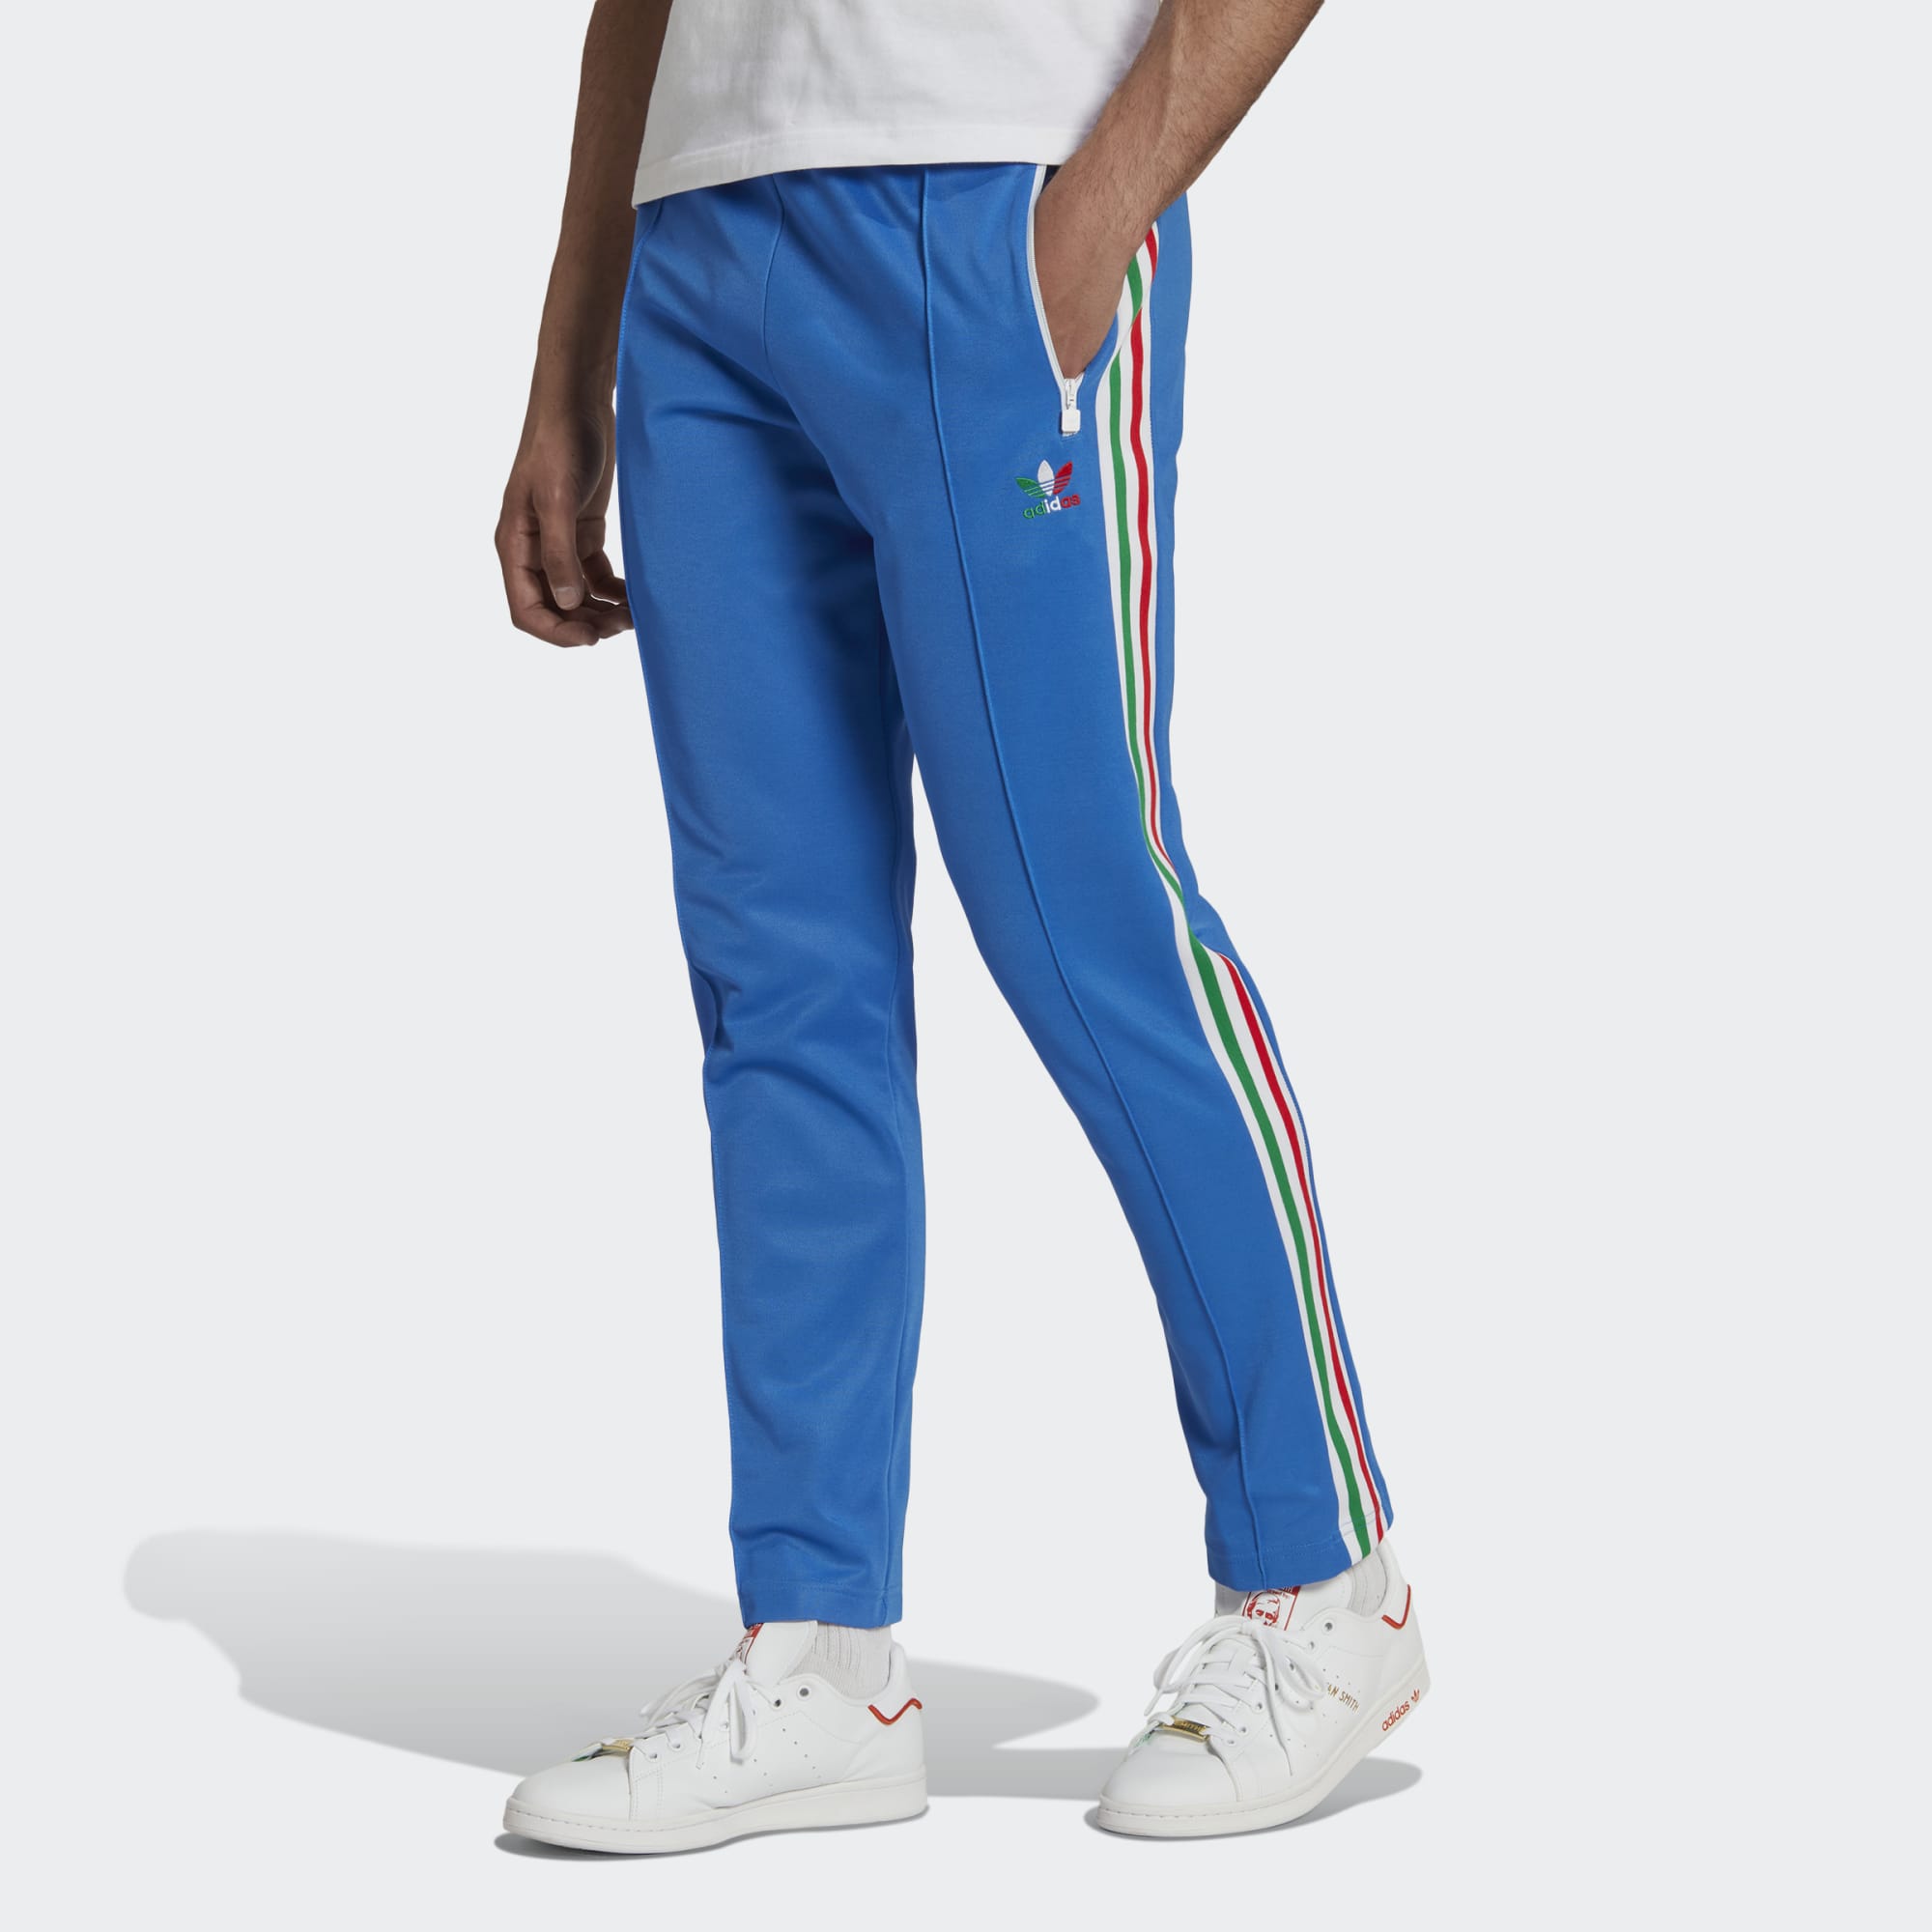 adidas Beckenbauer Track Pant Bright Royal / White / Red / Green